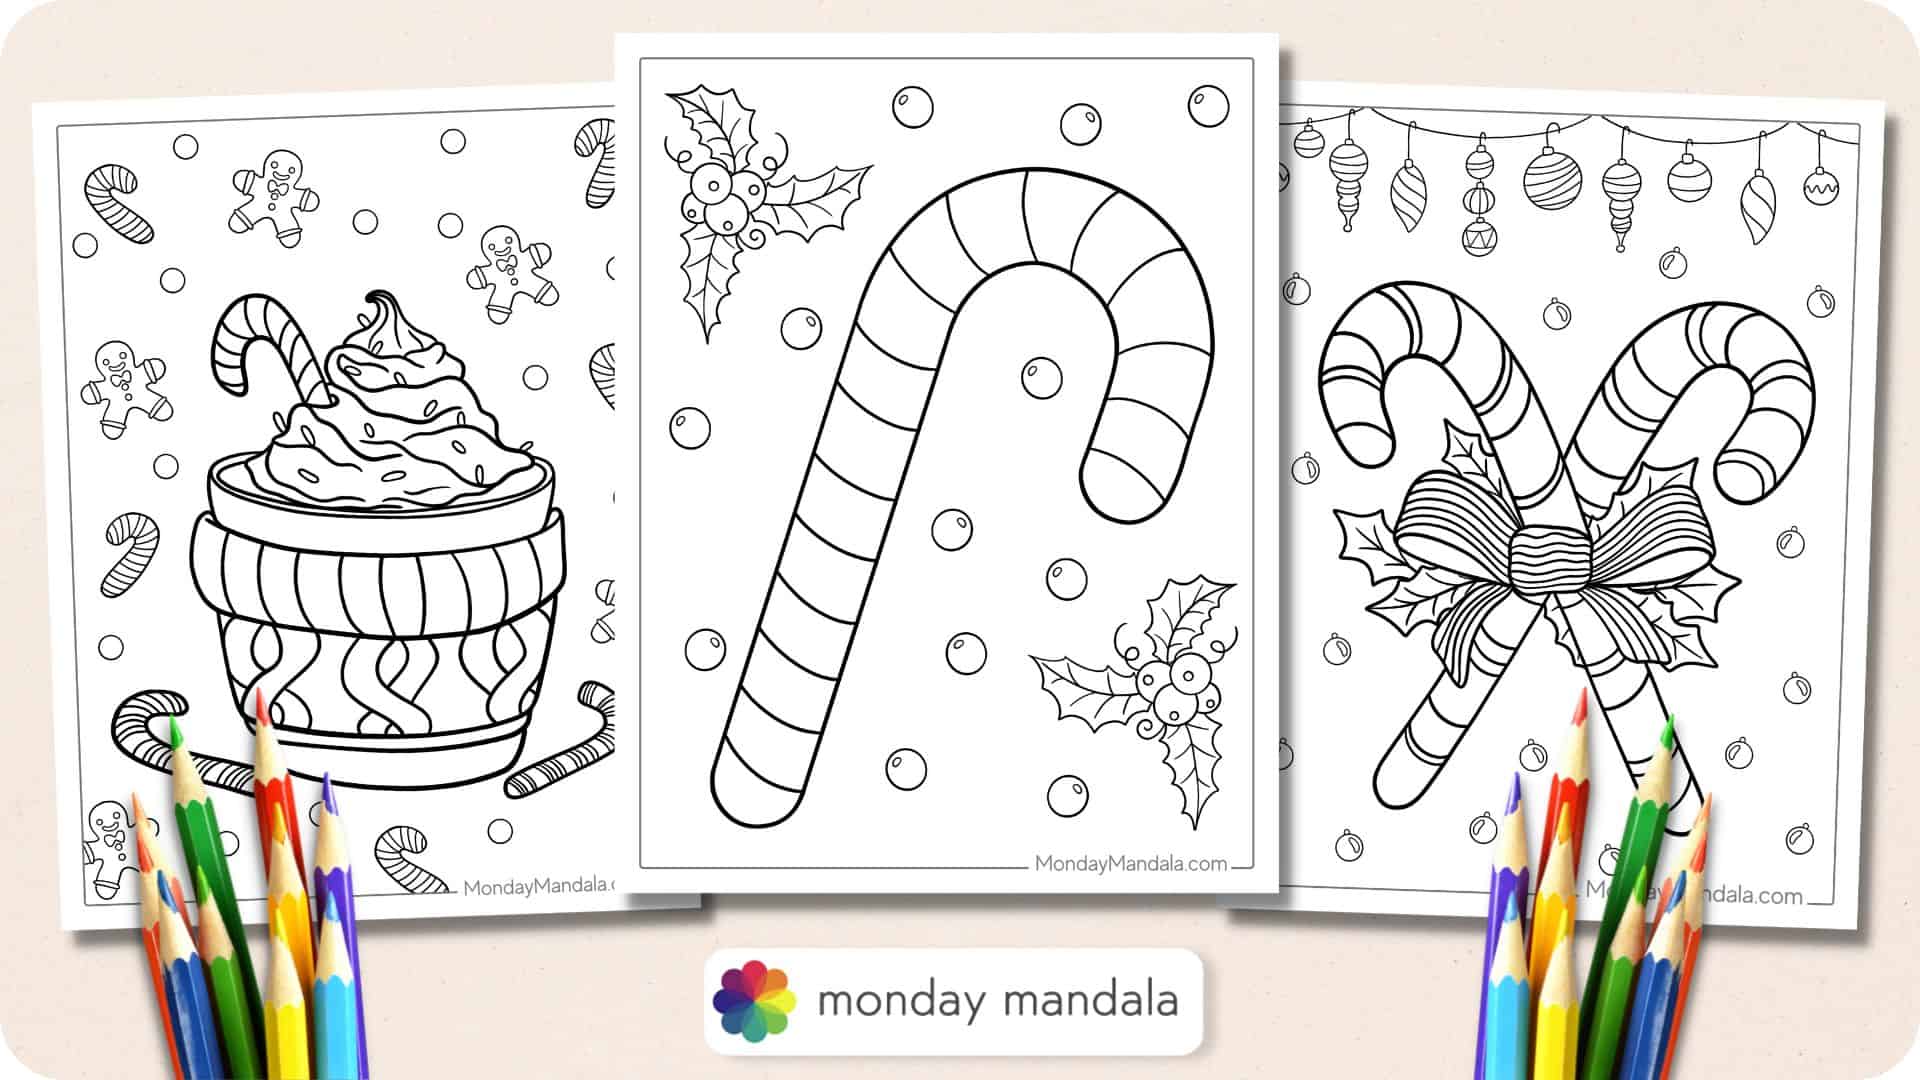 Candy cane coloring pages free pdf printables